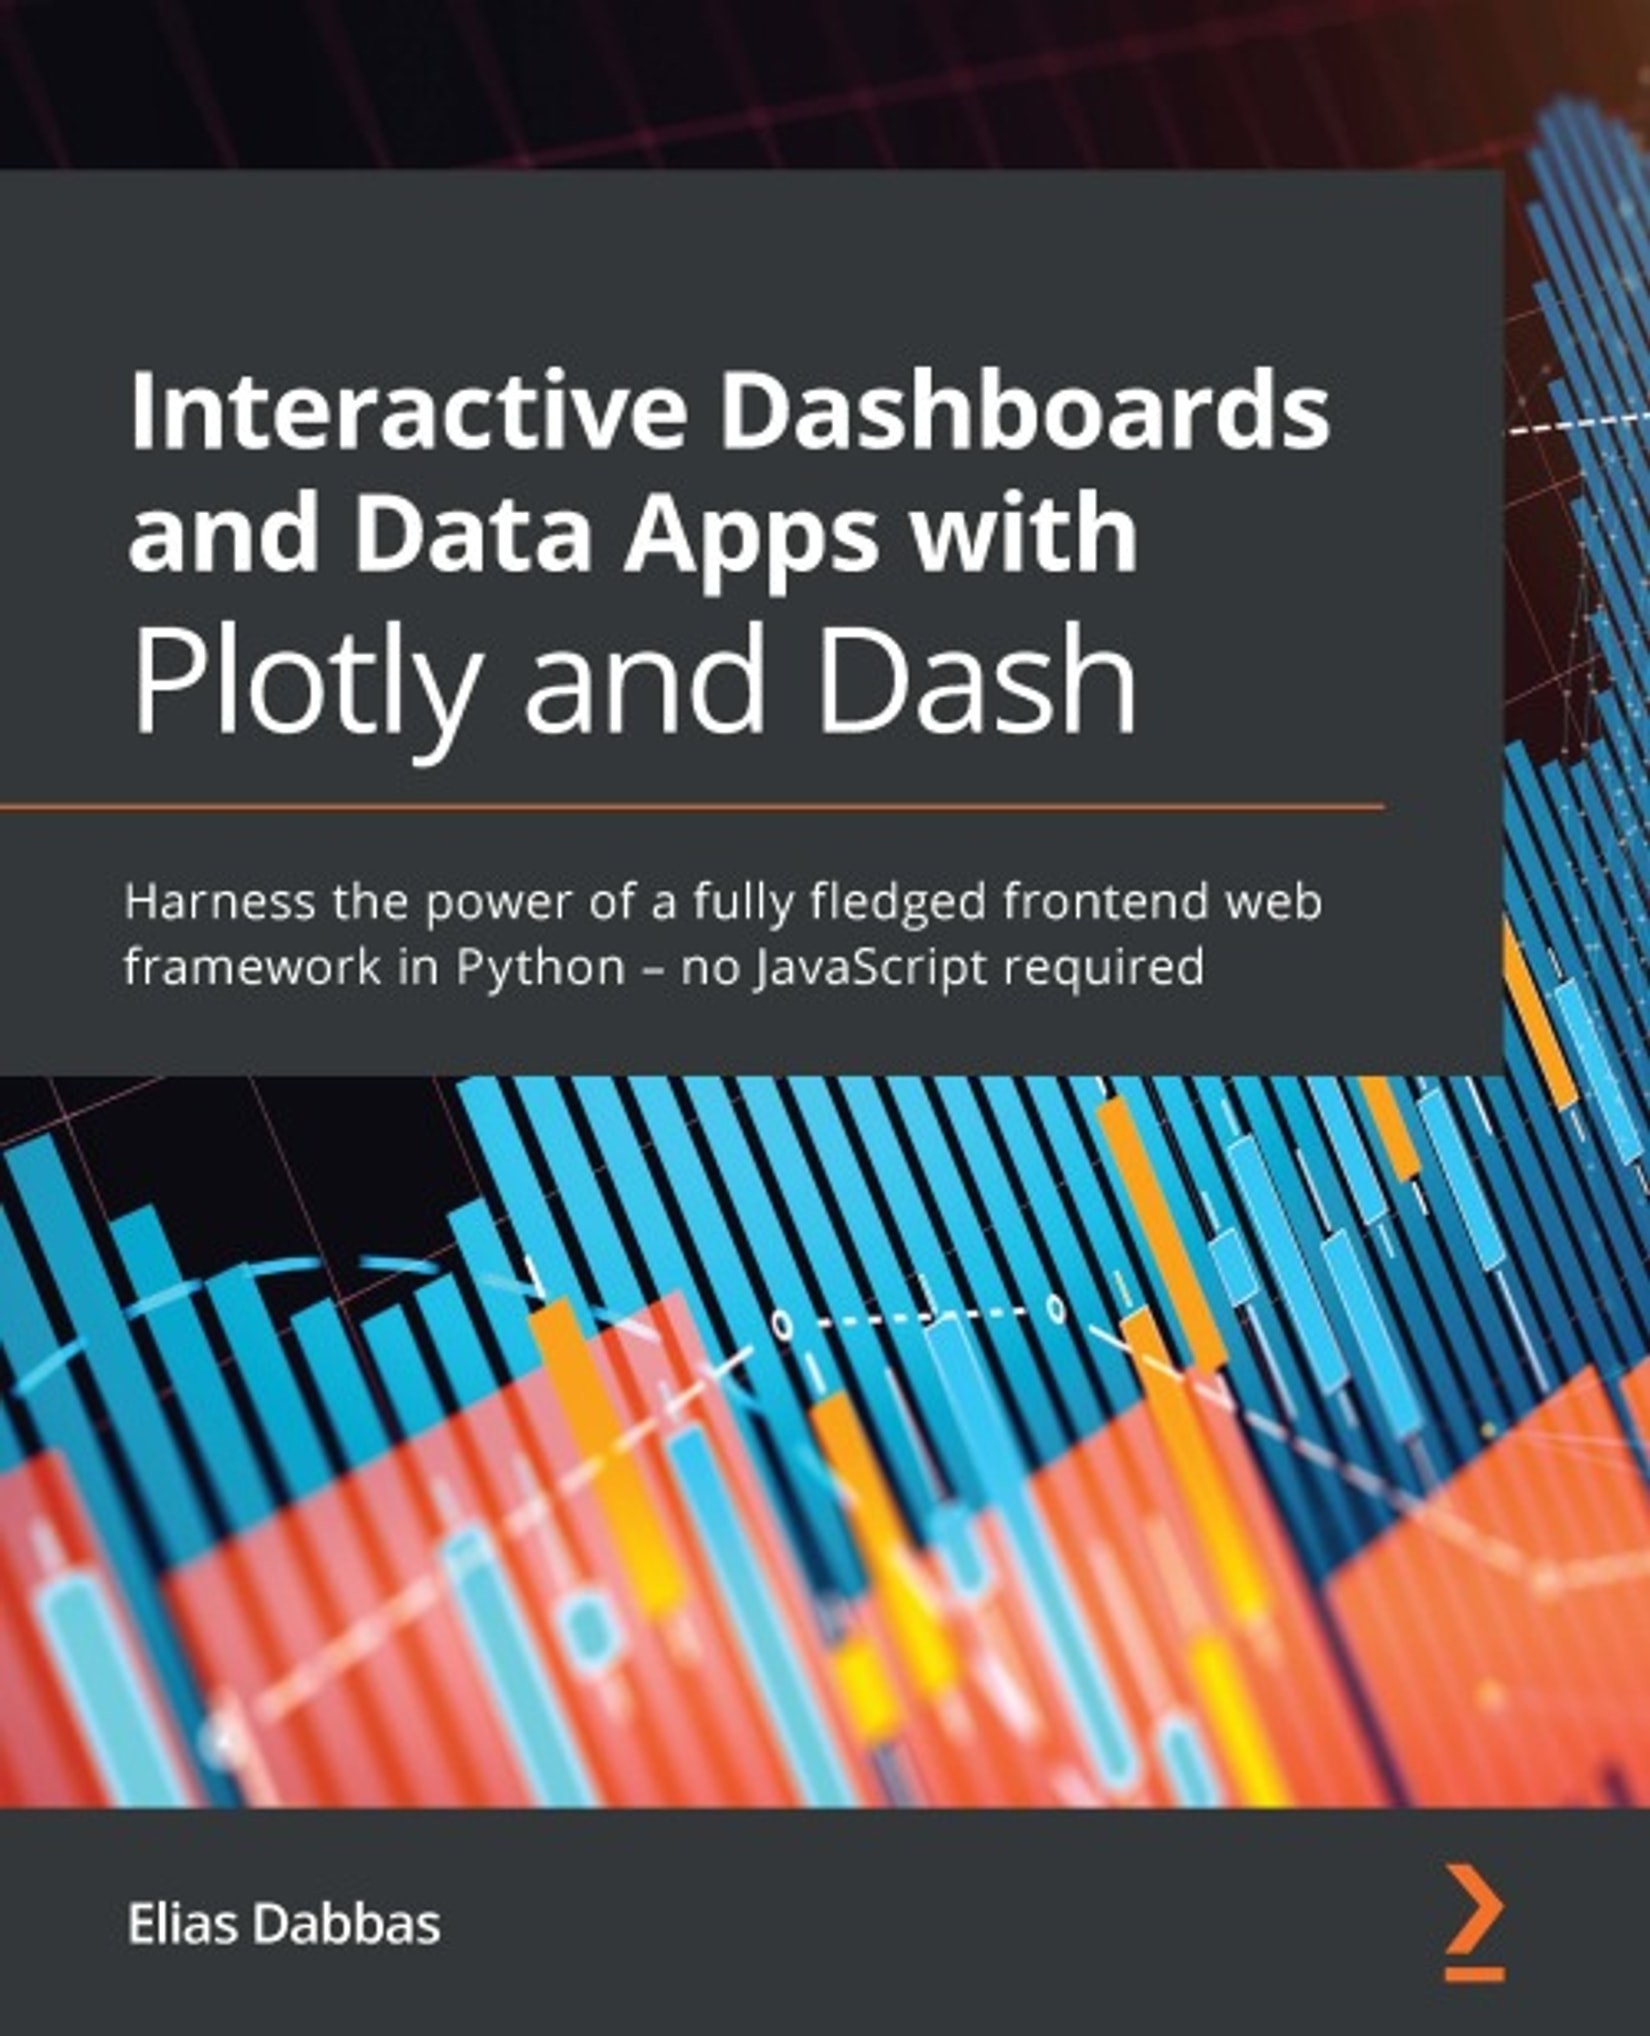 Interactive Dashboards and Data Apps With Plotly and Dash: Harness the Power of a Fully Fledged Frontend Web Framework in Python - No JavaScript Required